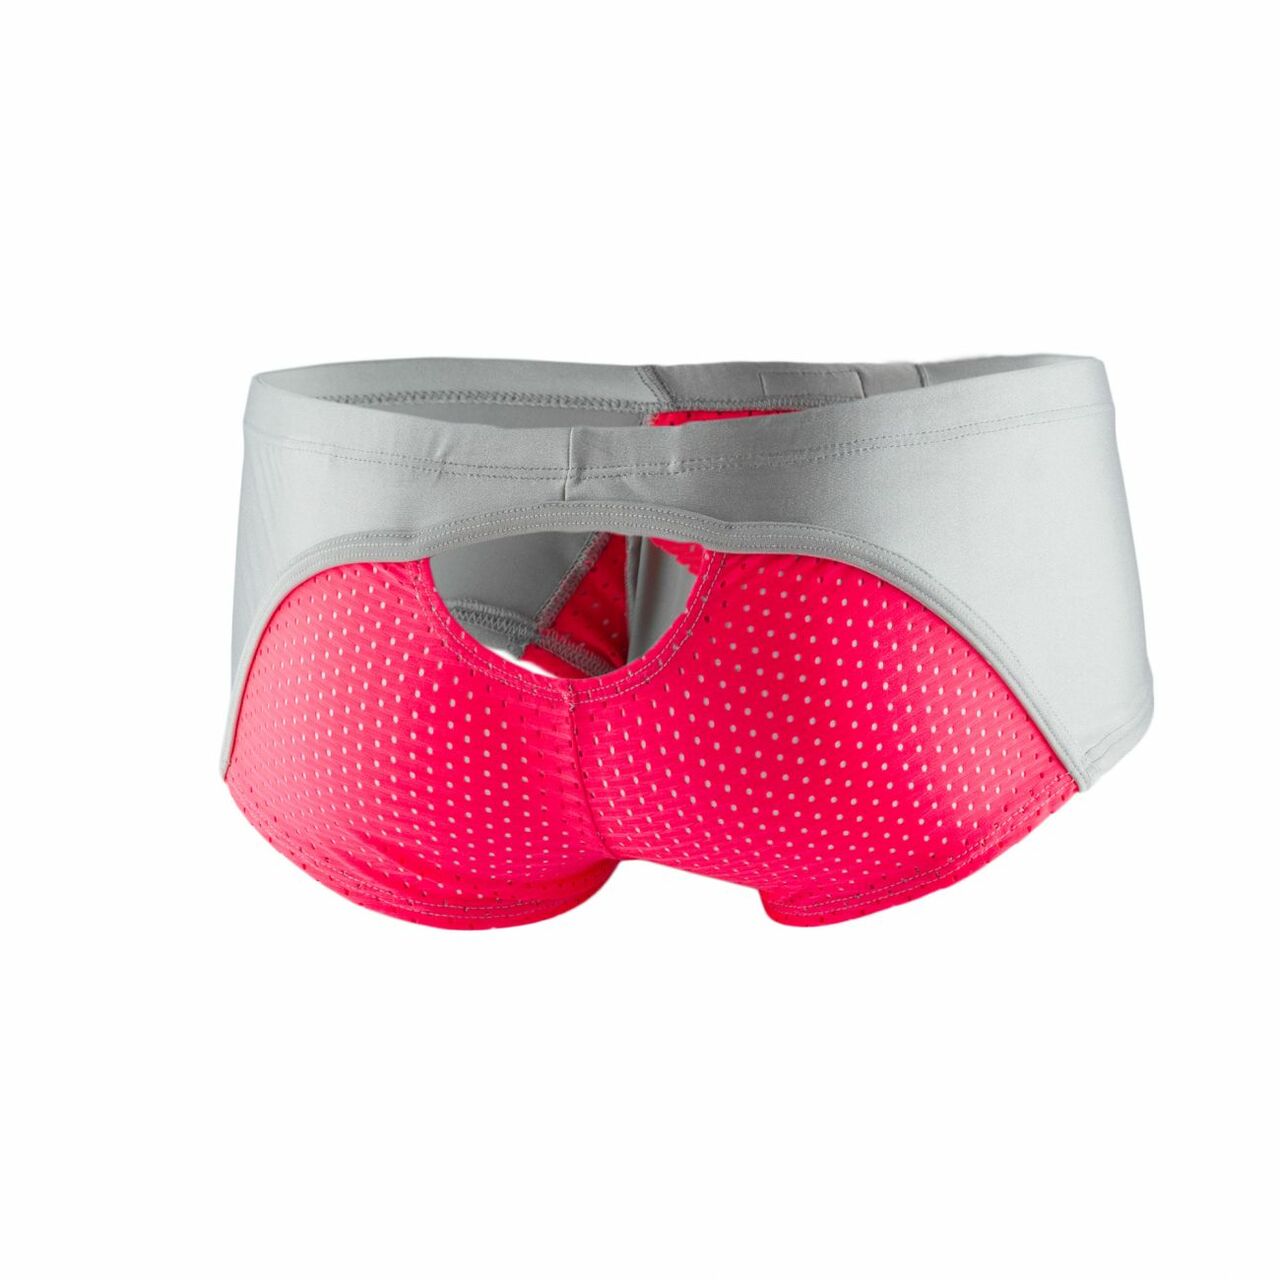 JCSTK - Mens Joe Snyder Sexiest Cheek Boxer Brief Coral and Gray